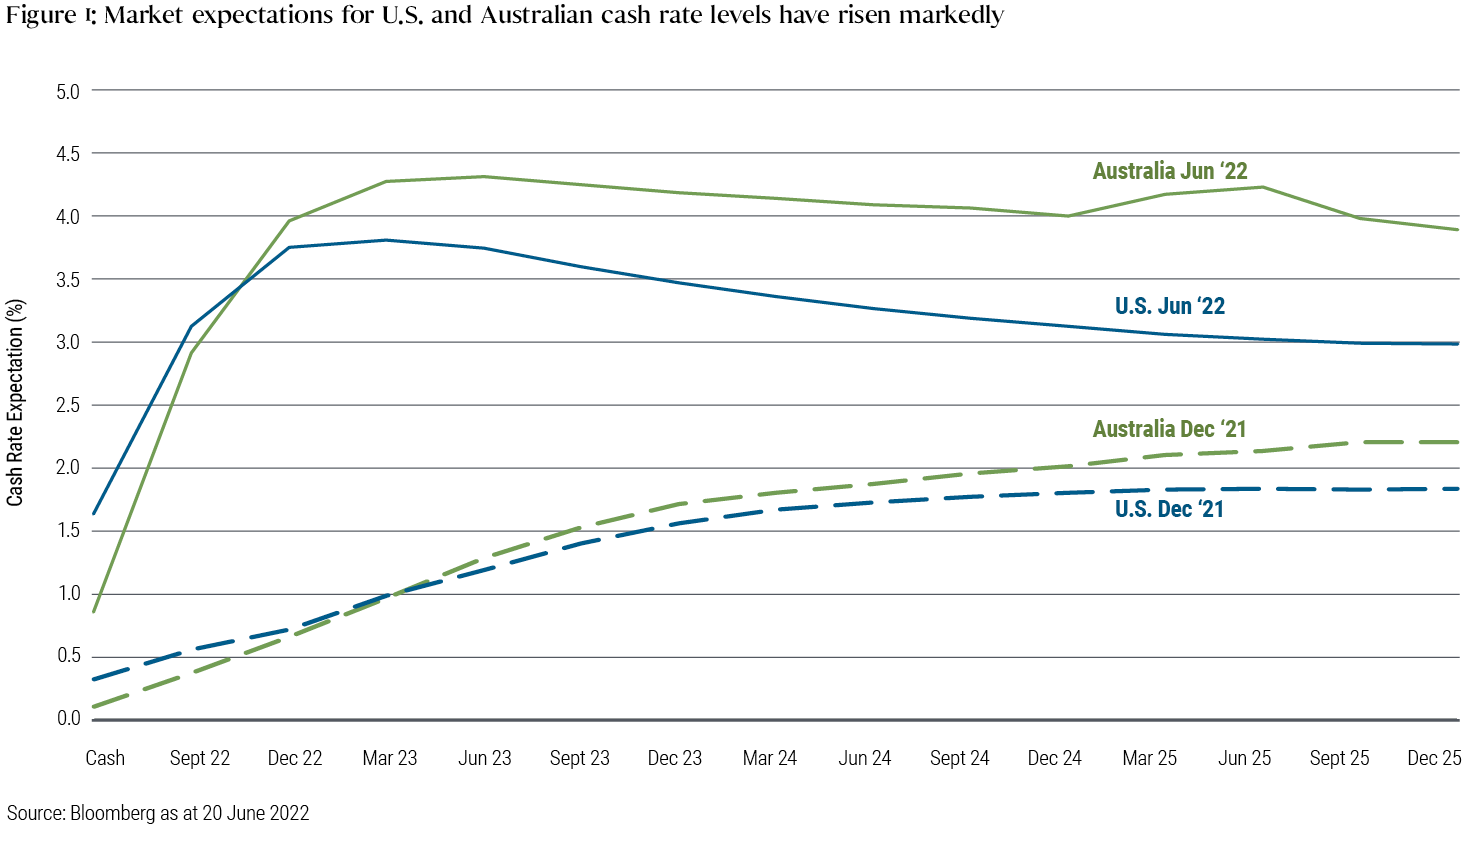 Market expectations for U.S. and Australian cash rate levels have risen markedly